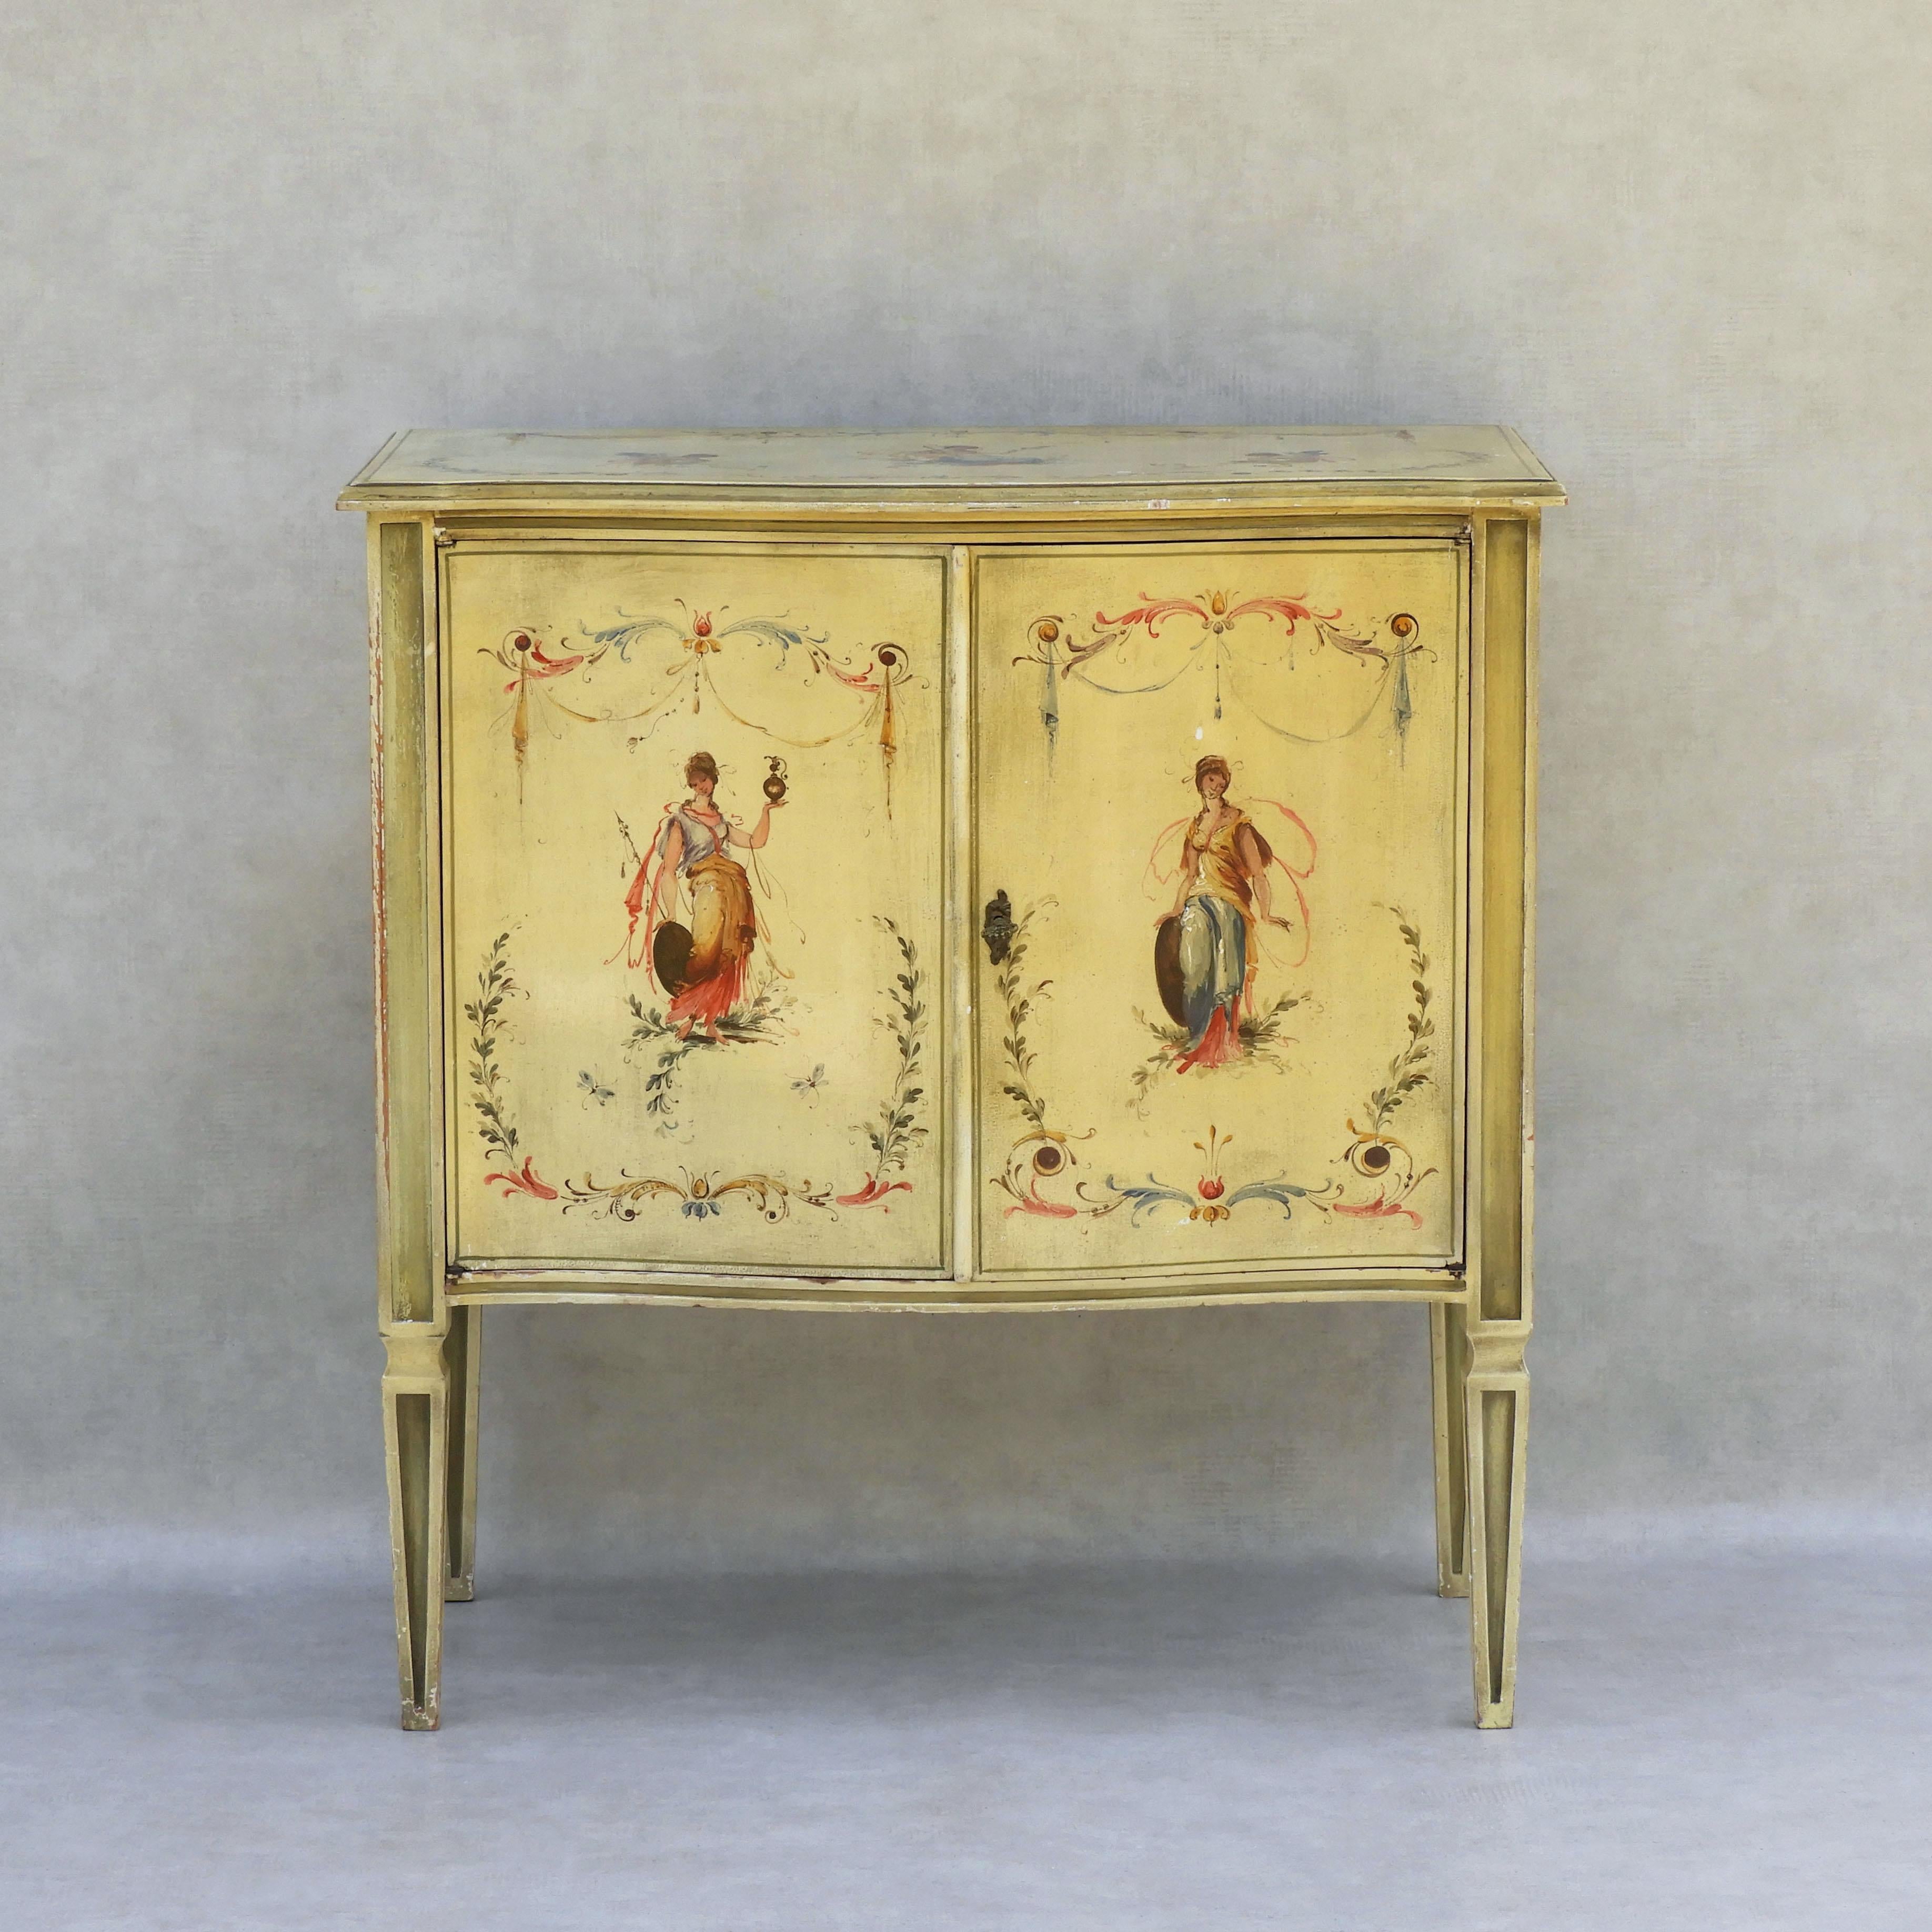 Italian hand-painted Venetian style cabinet, C1960
Beautiful Venetian style painted cabinet c1960s Italy.
Simple neoclassical style, wonderfully complimented by the delicate figurative, floral and scrollwork decoration. 
Charming and practical